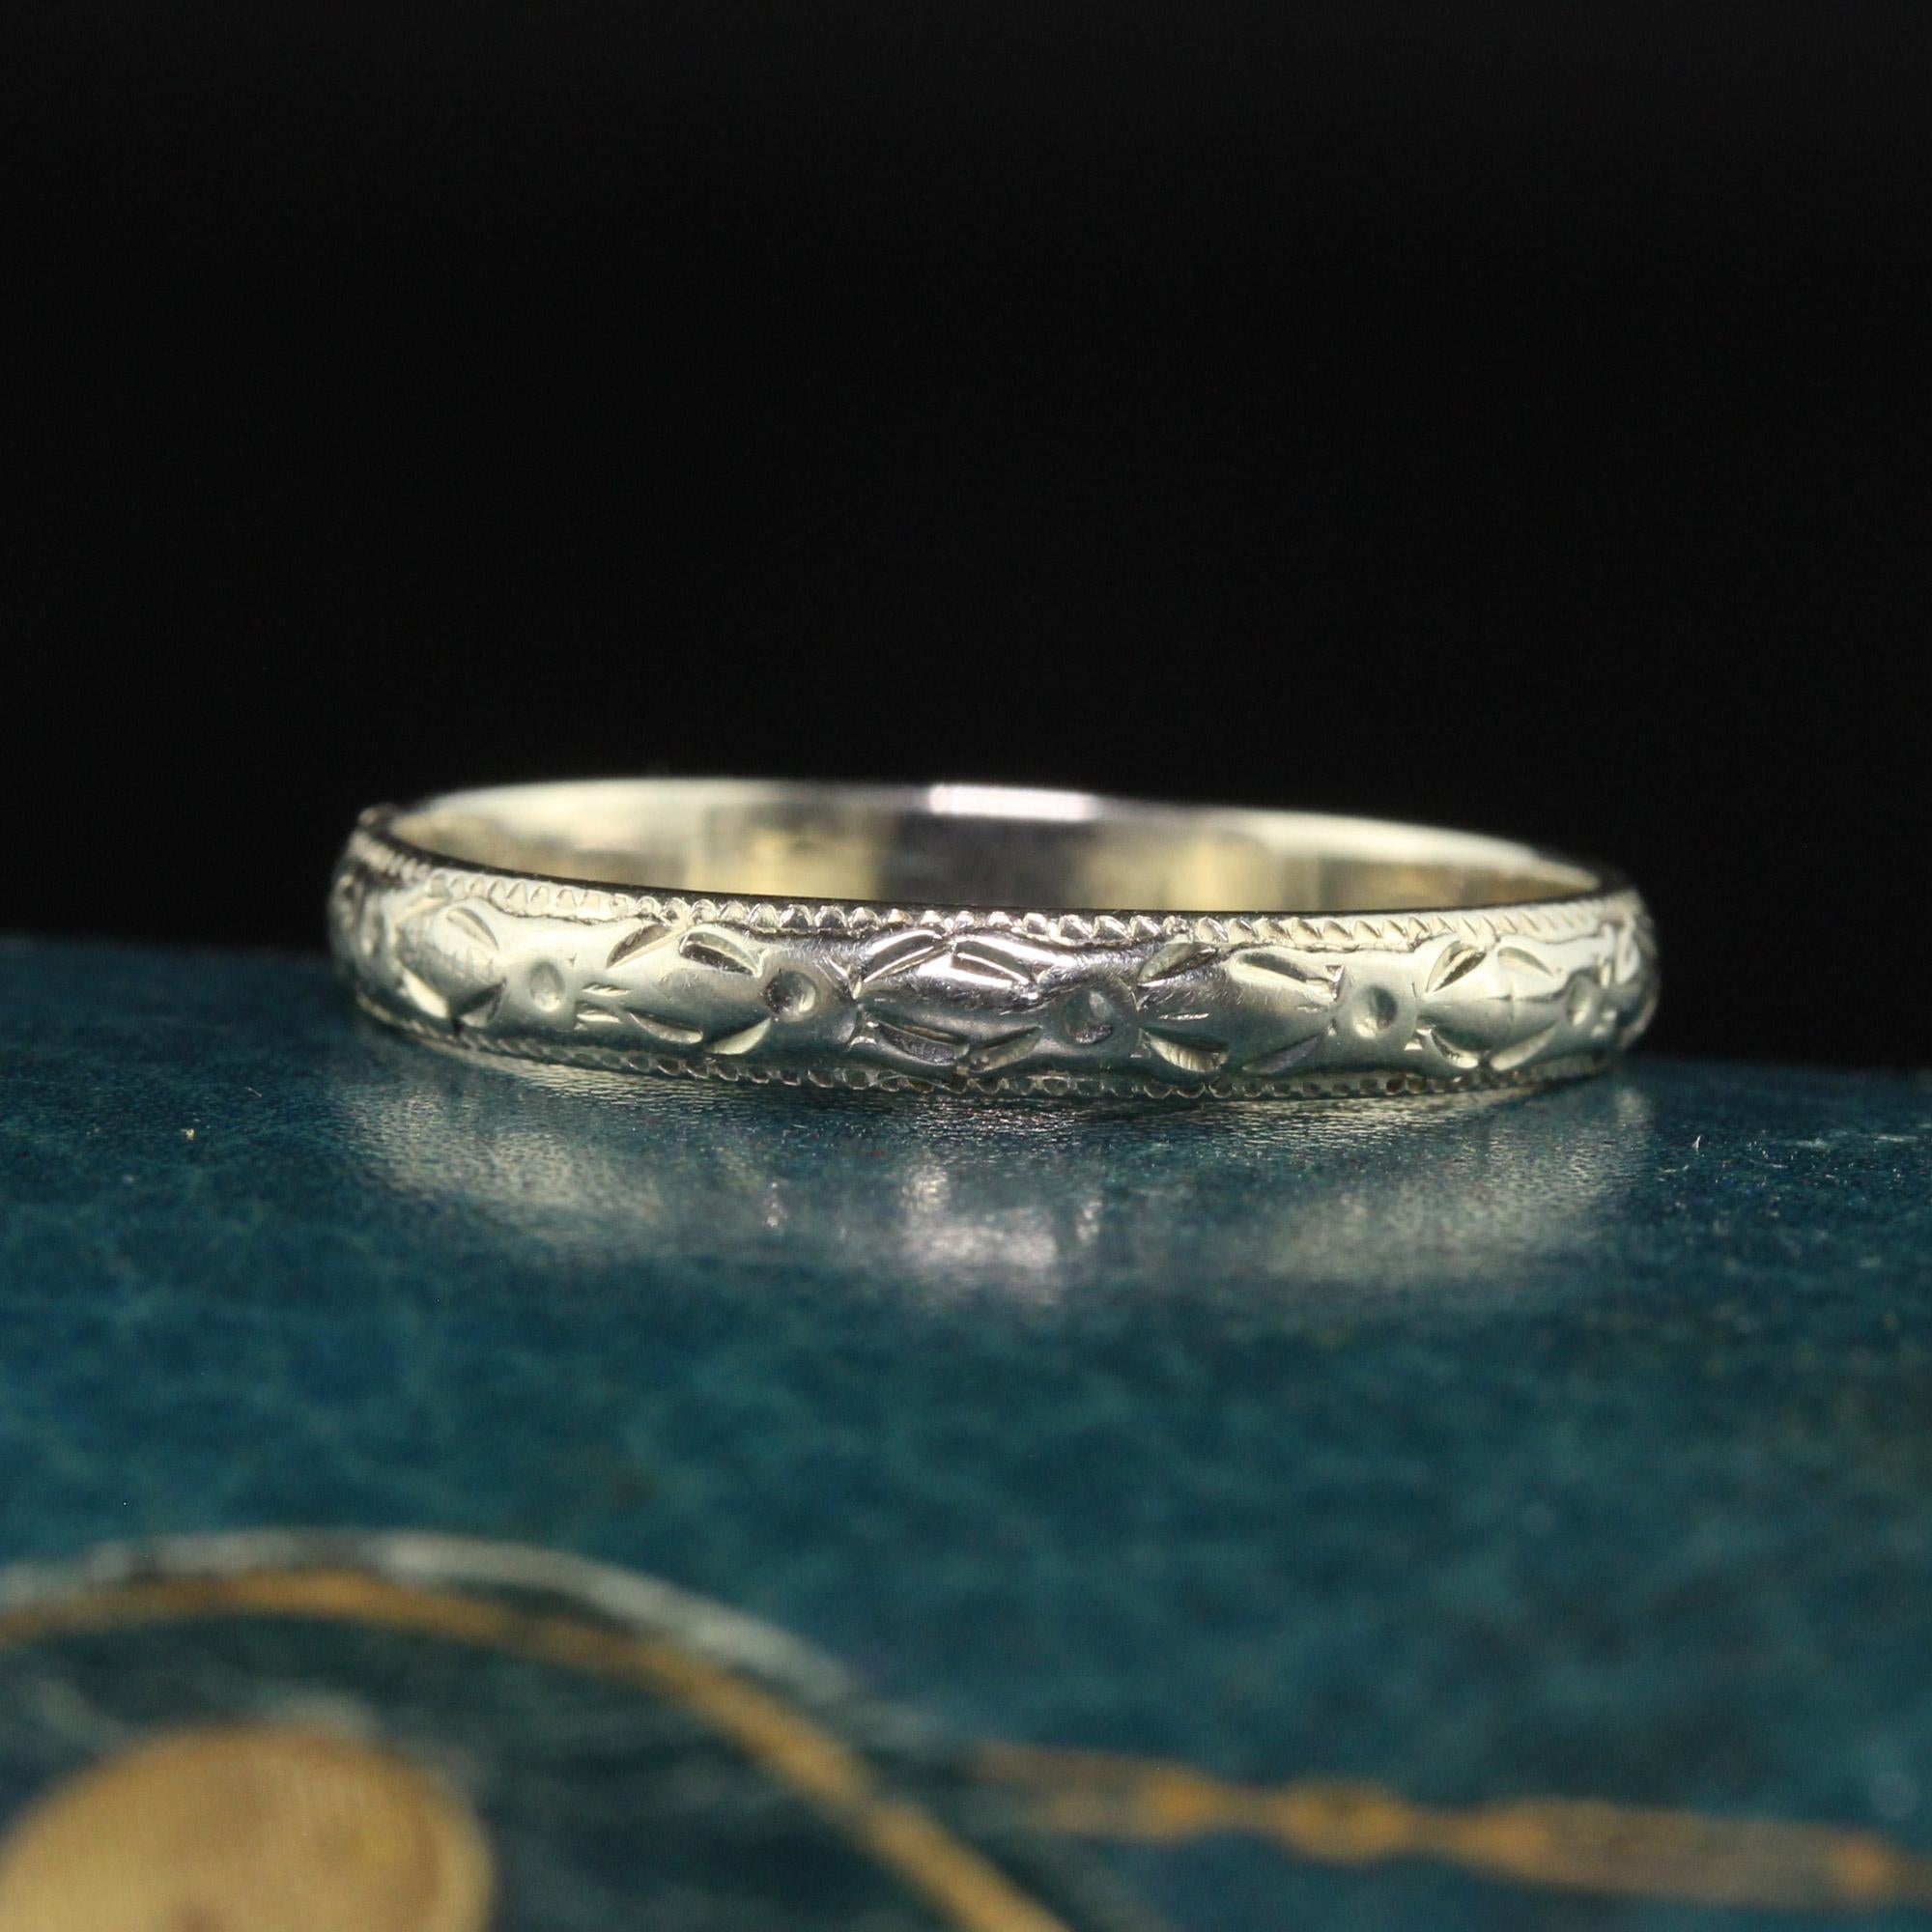 Beautiful Antique Art Deco 18K White Gold Engraved Wedding Band - Size 6. This incredible wedding band is crafted in 18k white gold. The band is engraved around the entire ring and is in great condition. The band sits low on the finger and can be